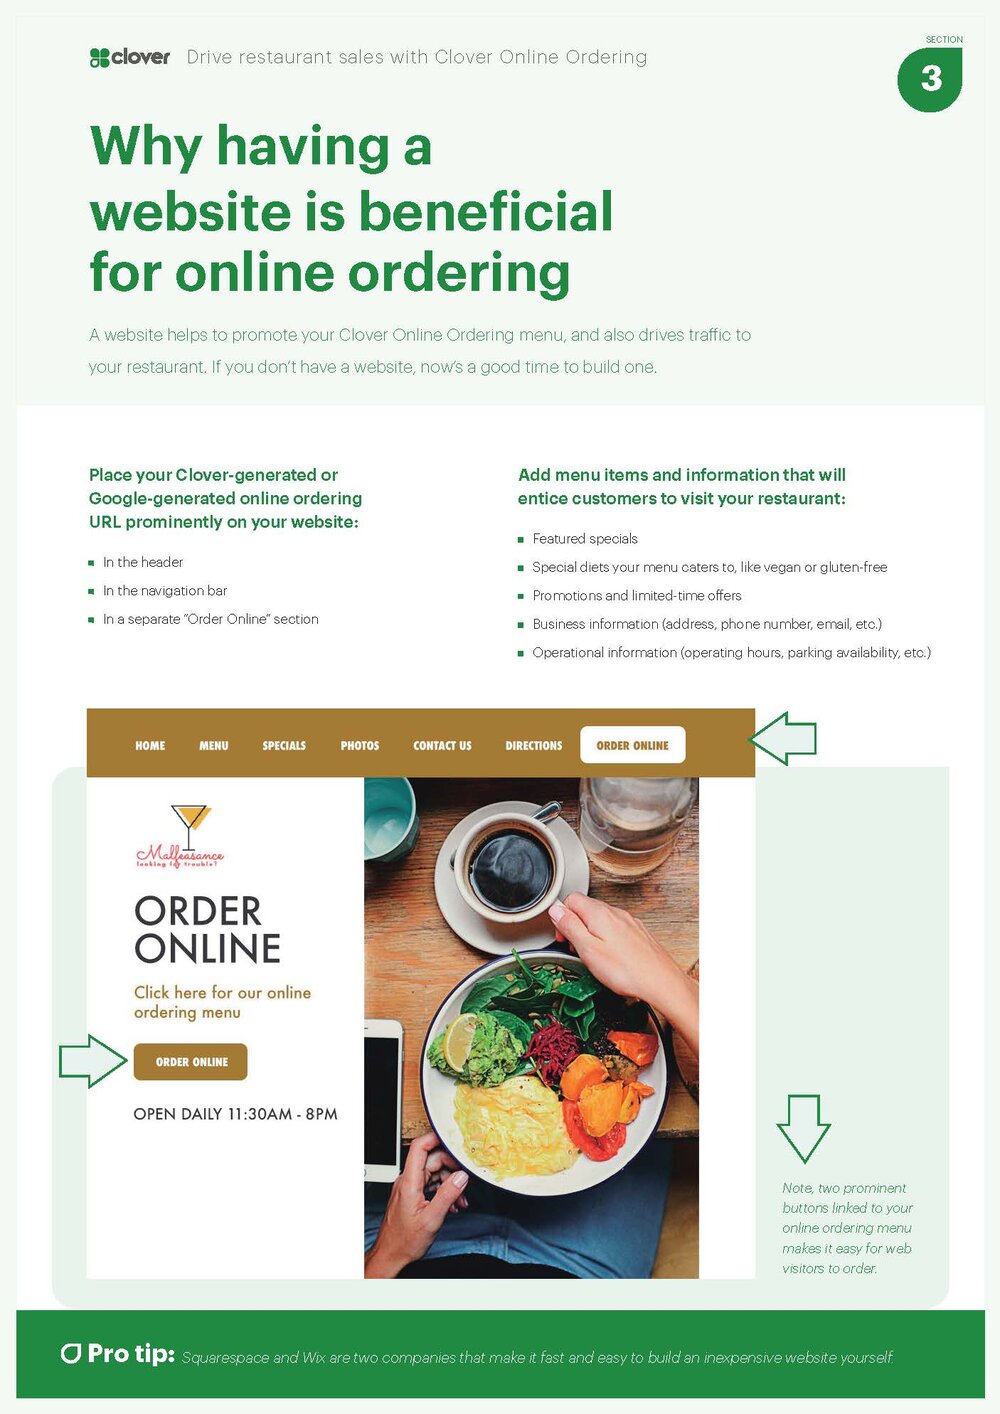 Drive Sales With Clover Online Ordering_Page_06.jpg